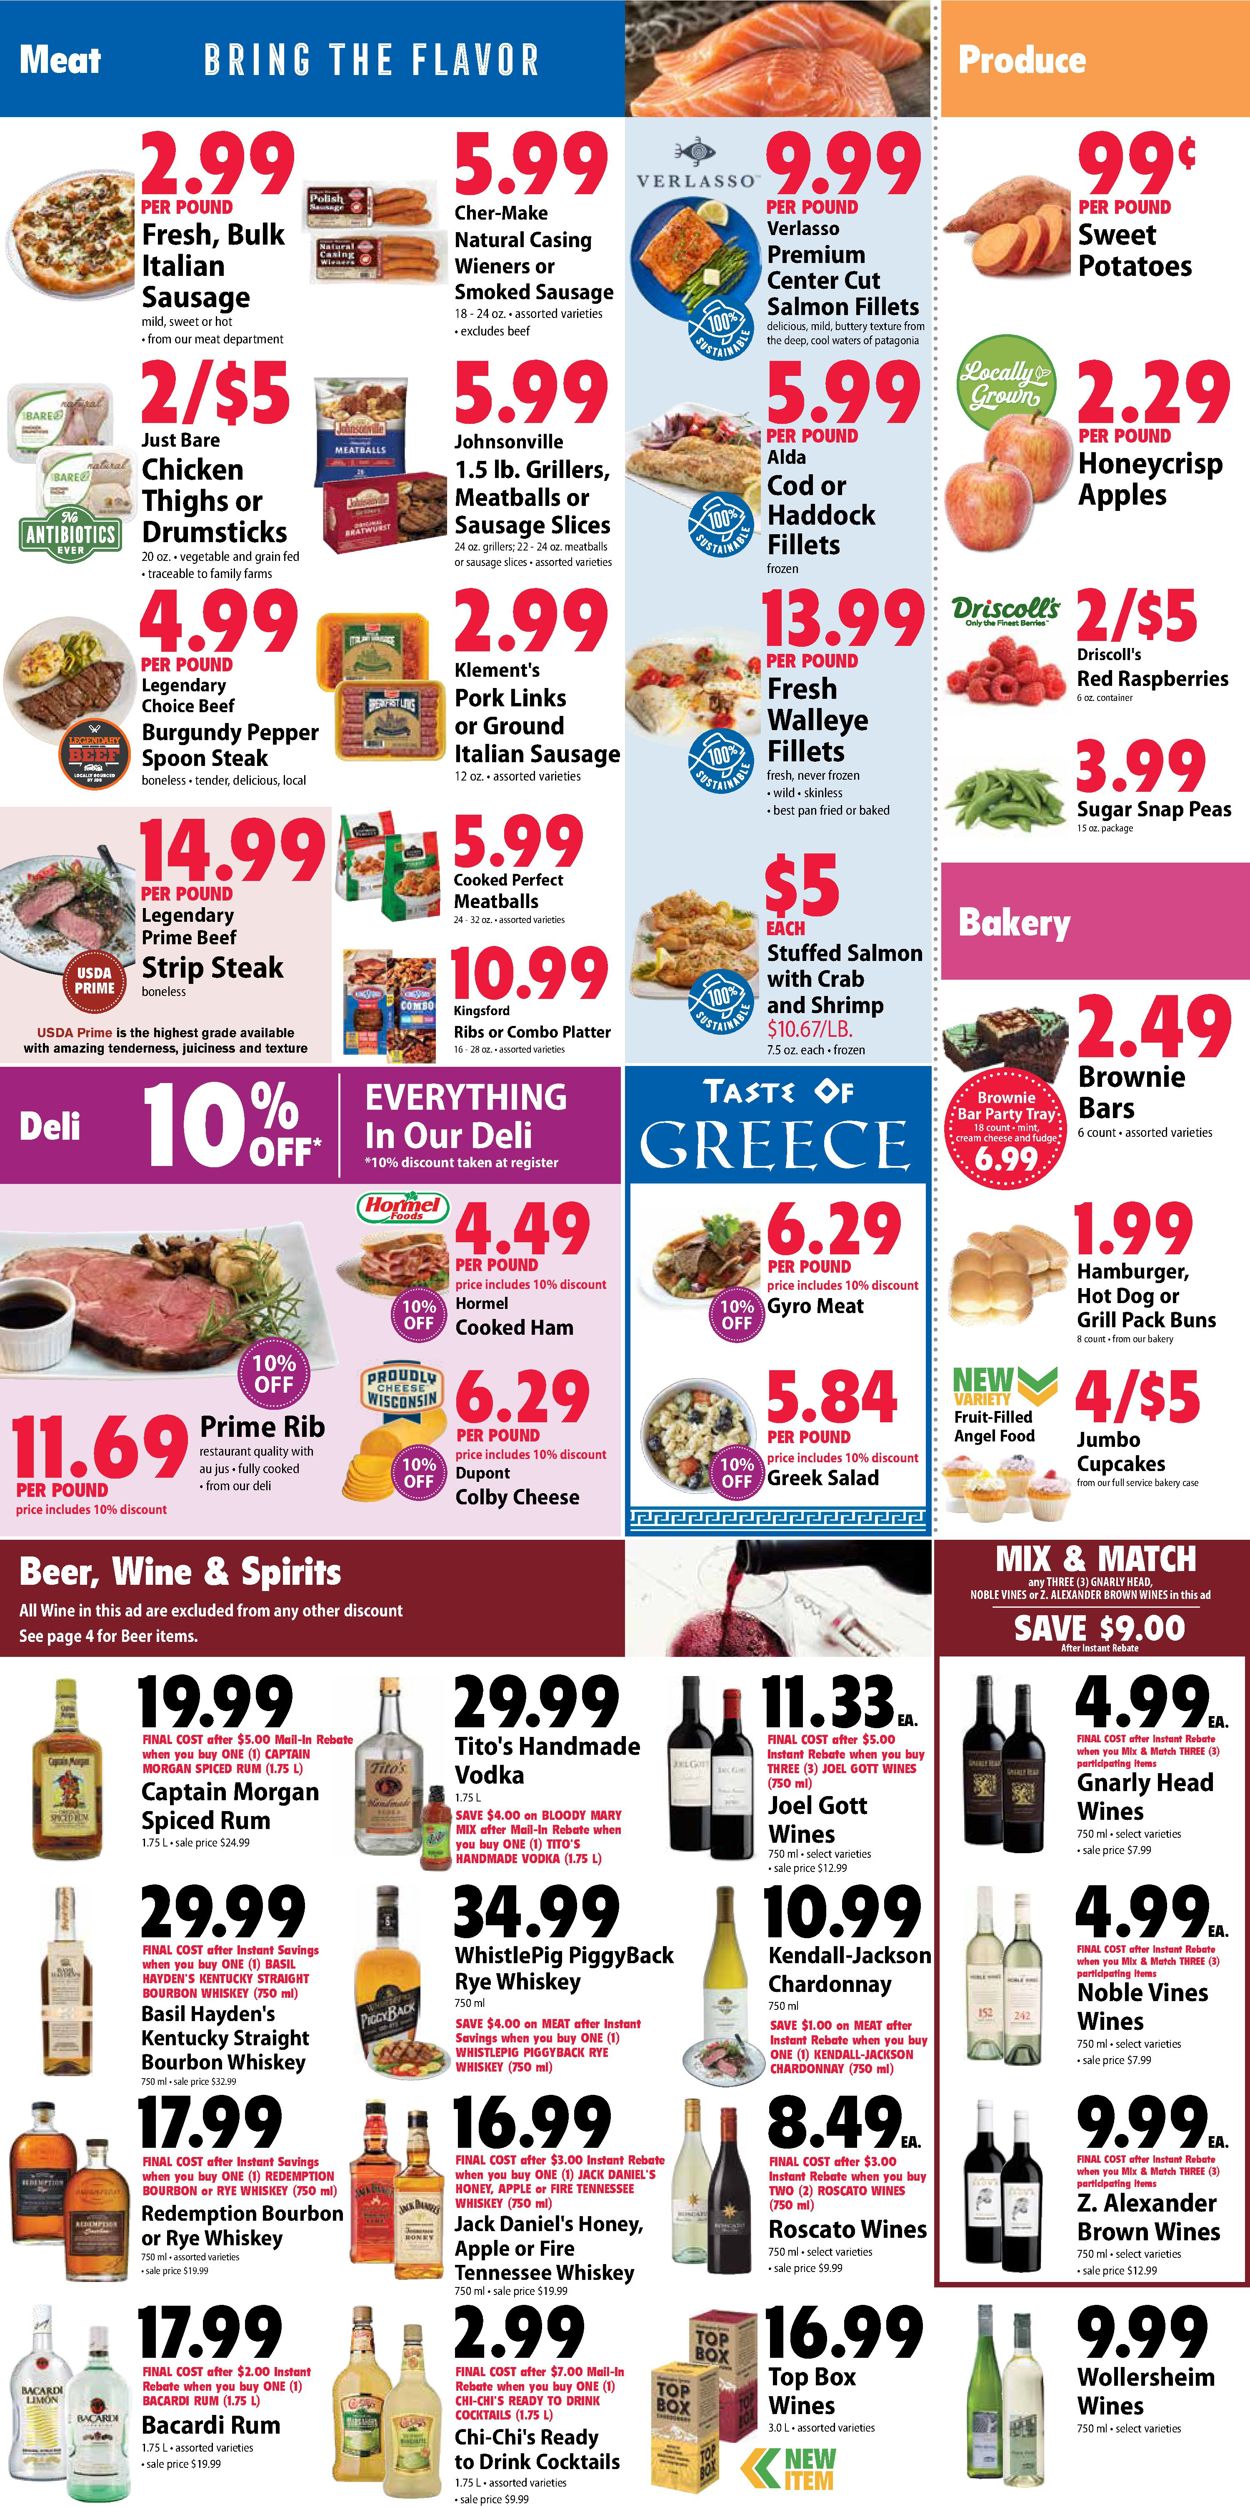 Festival Foods Current weekly ad 09/30 - 10/13/2020 [2] - frequent-ads.com